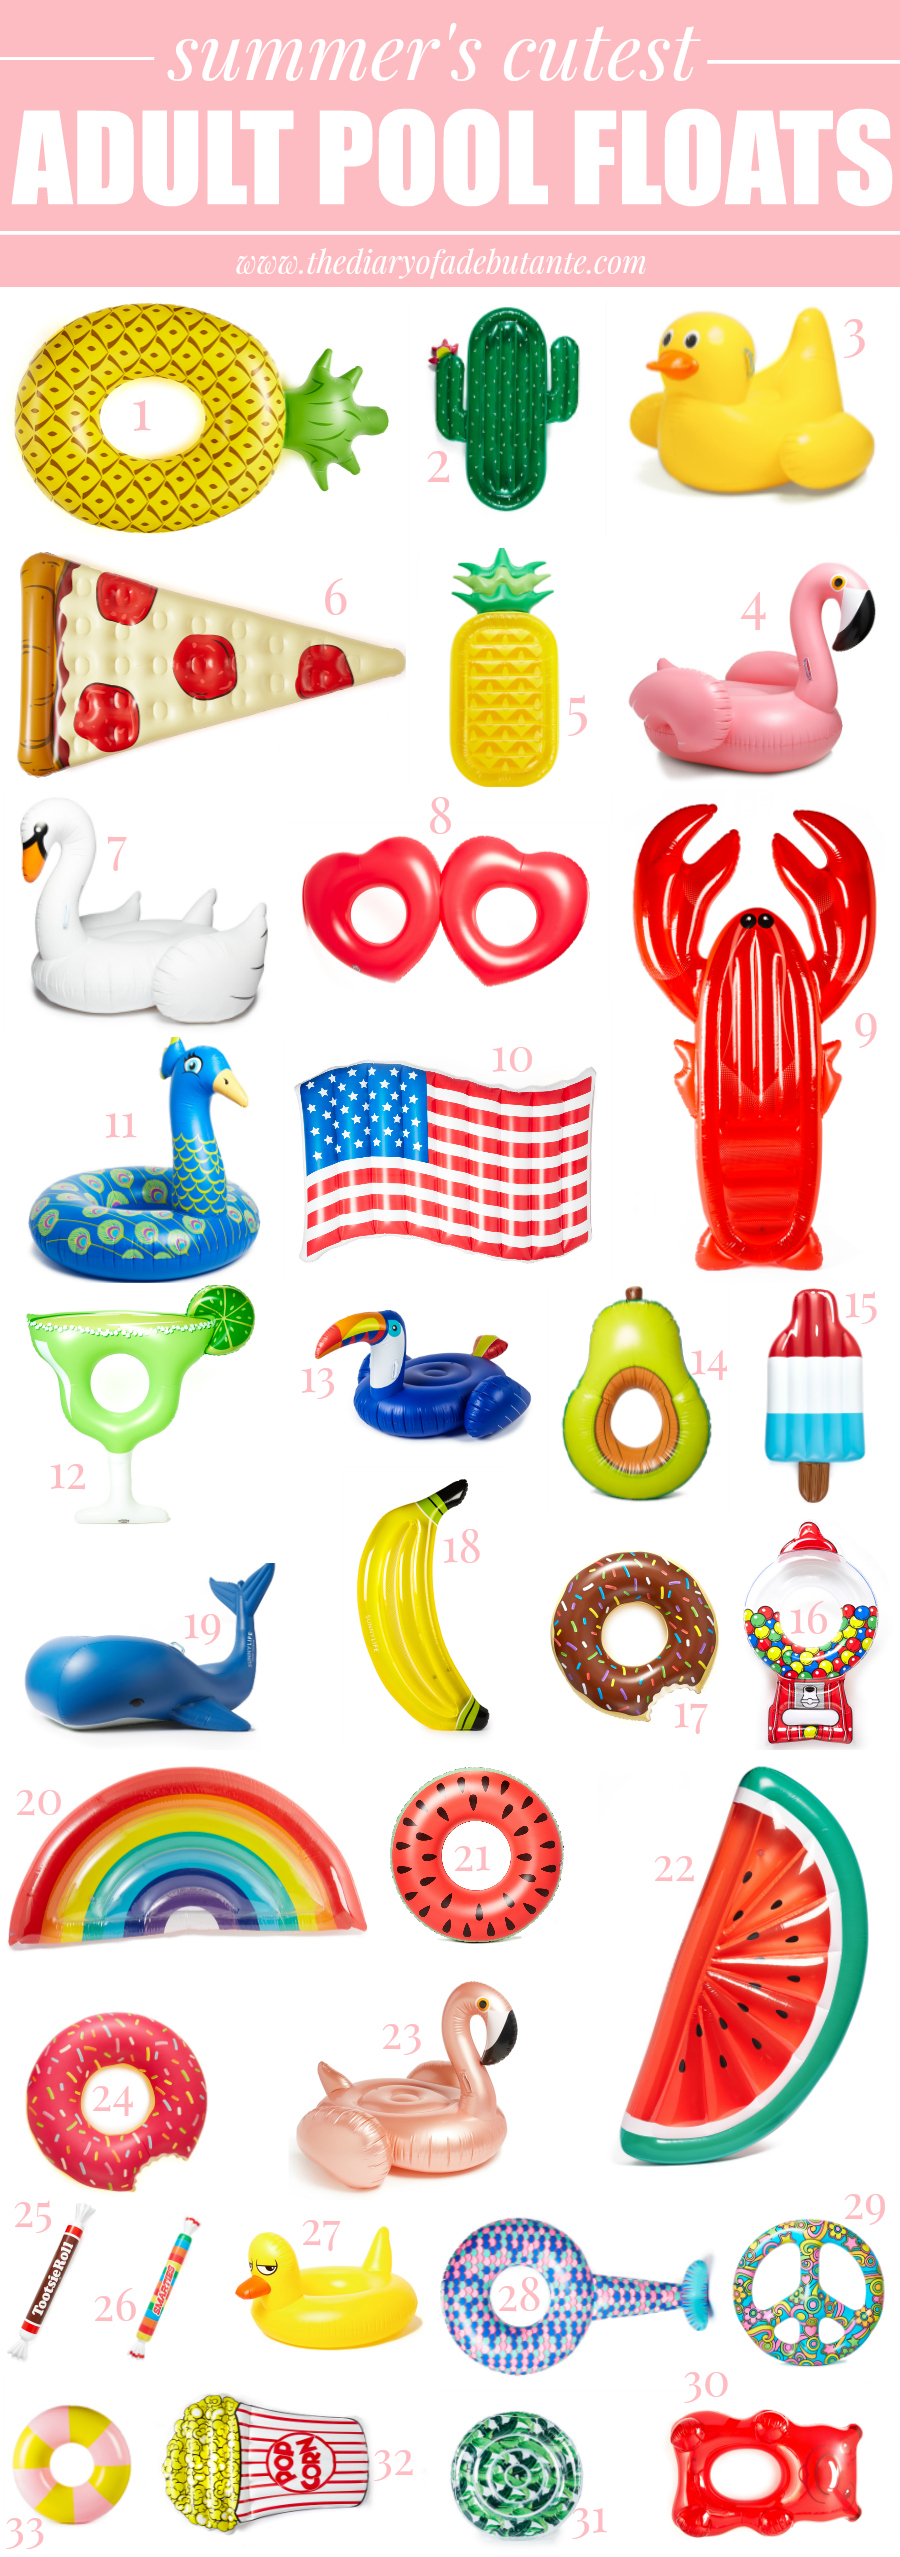 Summer's most fun adult pool floats from Shopbop